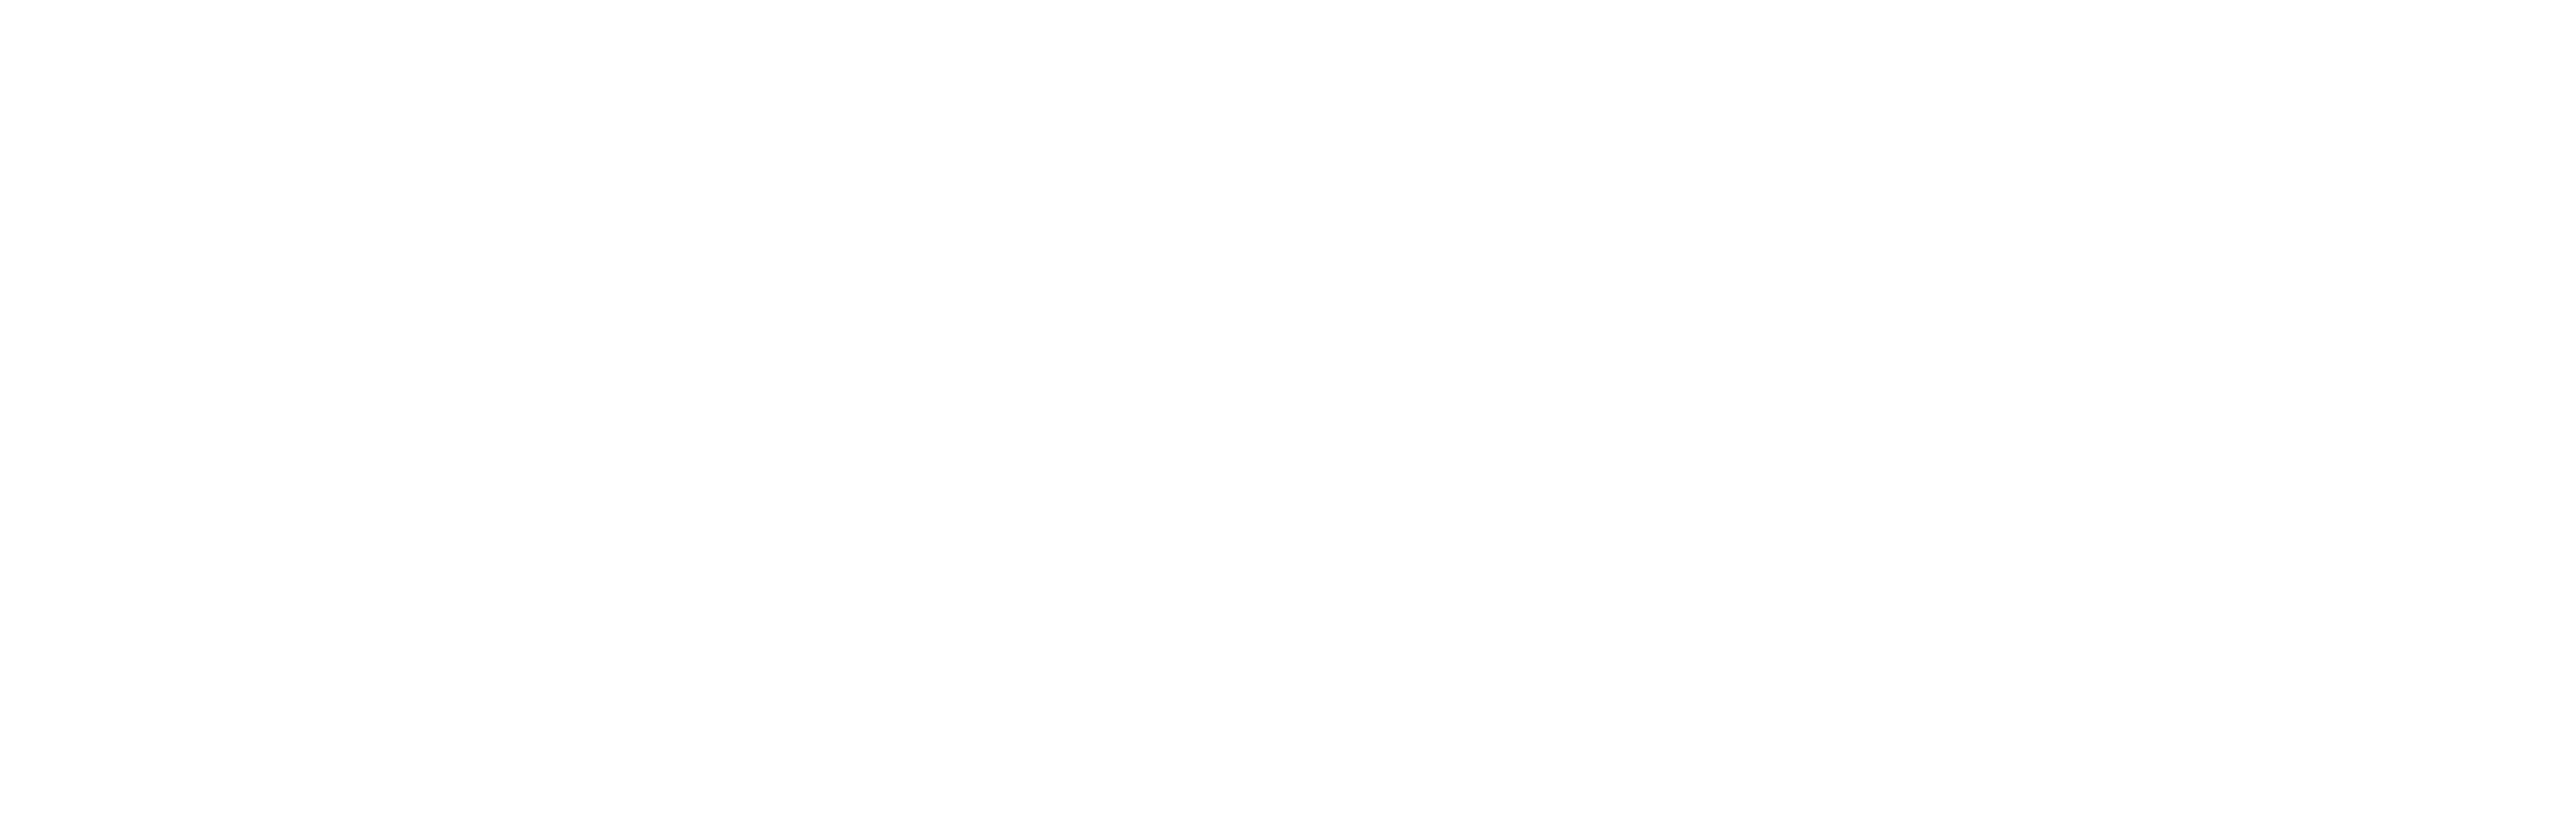 American Chemical Society’s Approved Chemistry Program Seal